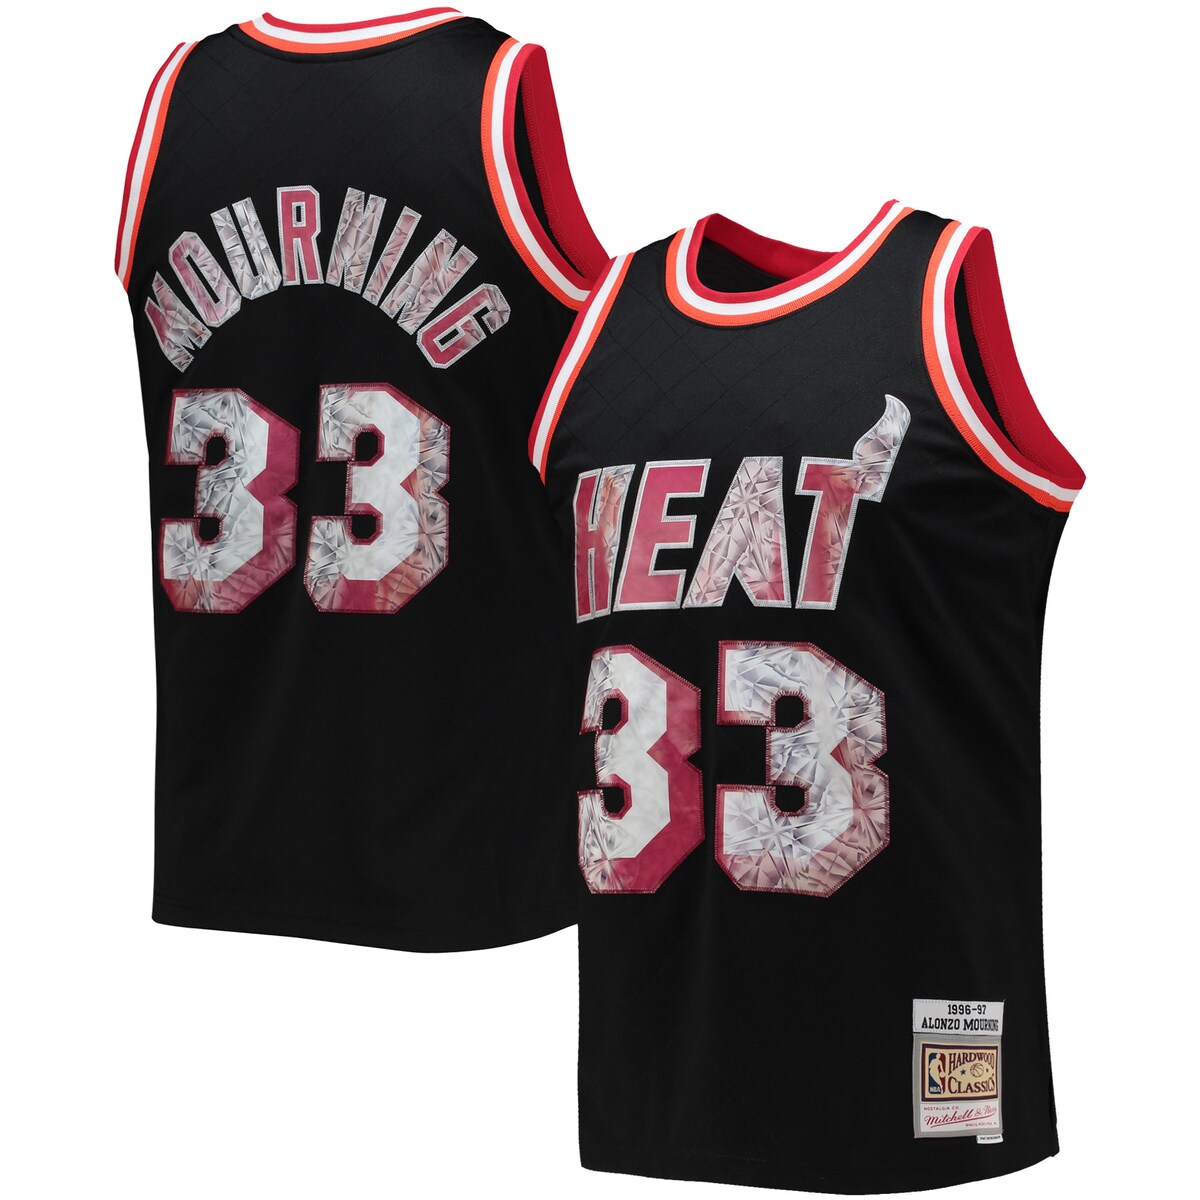 For the NBA's 75th anniversary, throw it back to one of the stars of the Miami Heat with this Alonzo Mourning Hardwood Classics Diamond Swingman jersey from Mitchell & Ness. It features faux diamond details for the league's big milestone and that old-school design Alonzo Mourning used to wear back in the day. This authentic piece of gear is a great way to mesh past and present as you get fired up for game day.Stitched designMachine wash, line drySwingman ThrowbackOfficially licensedImportedWoven jock tag at hemStitched holographic applique with faux diamond patternStraight hemline with side splitsMaterial: 100% PolyesterBrand: Mitchell & NessSleeveless